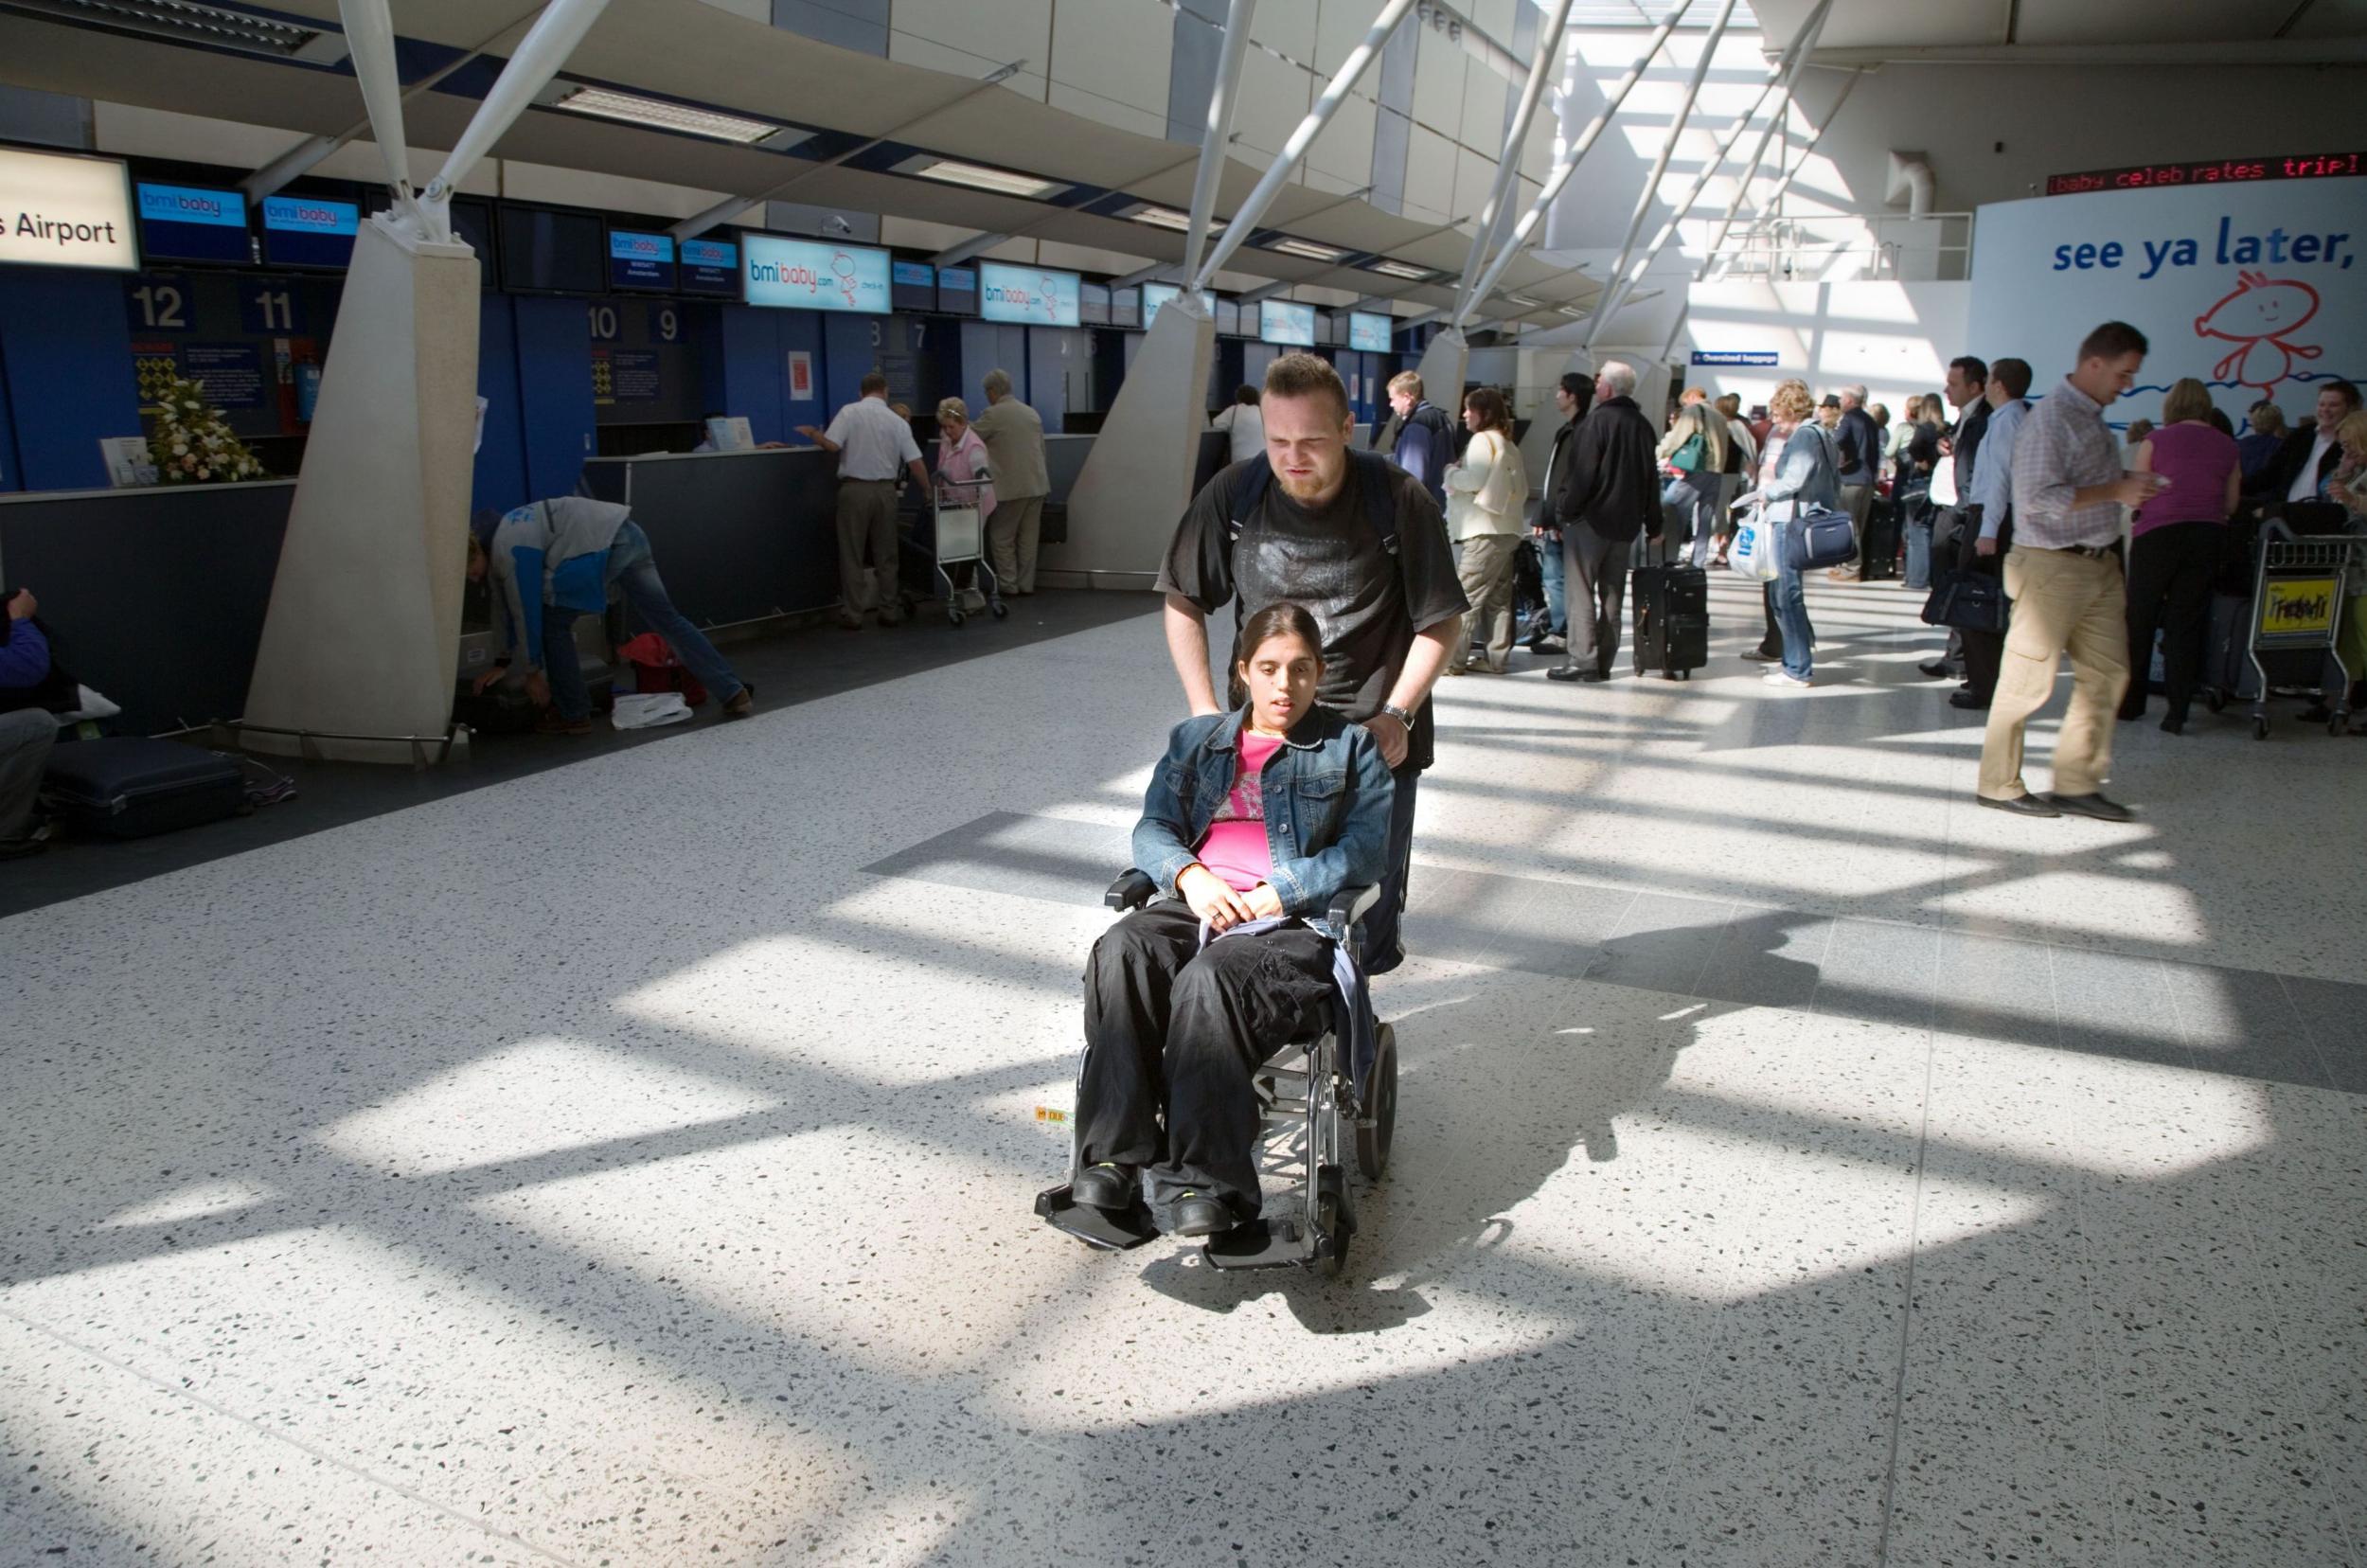 The government has promised to look at how passengers with disabilities are treated at the airport